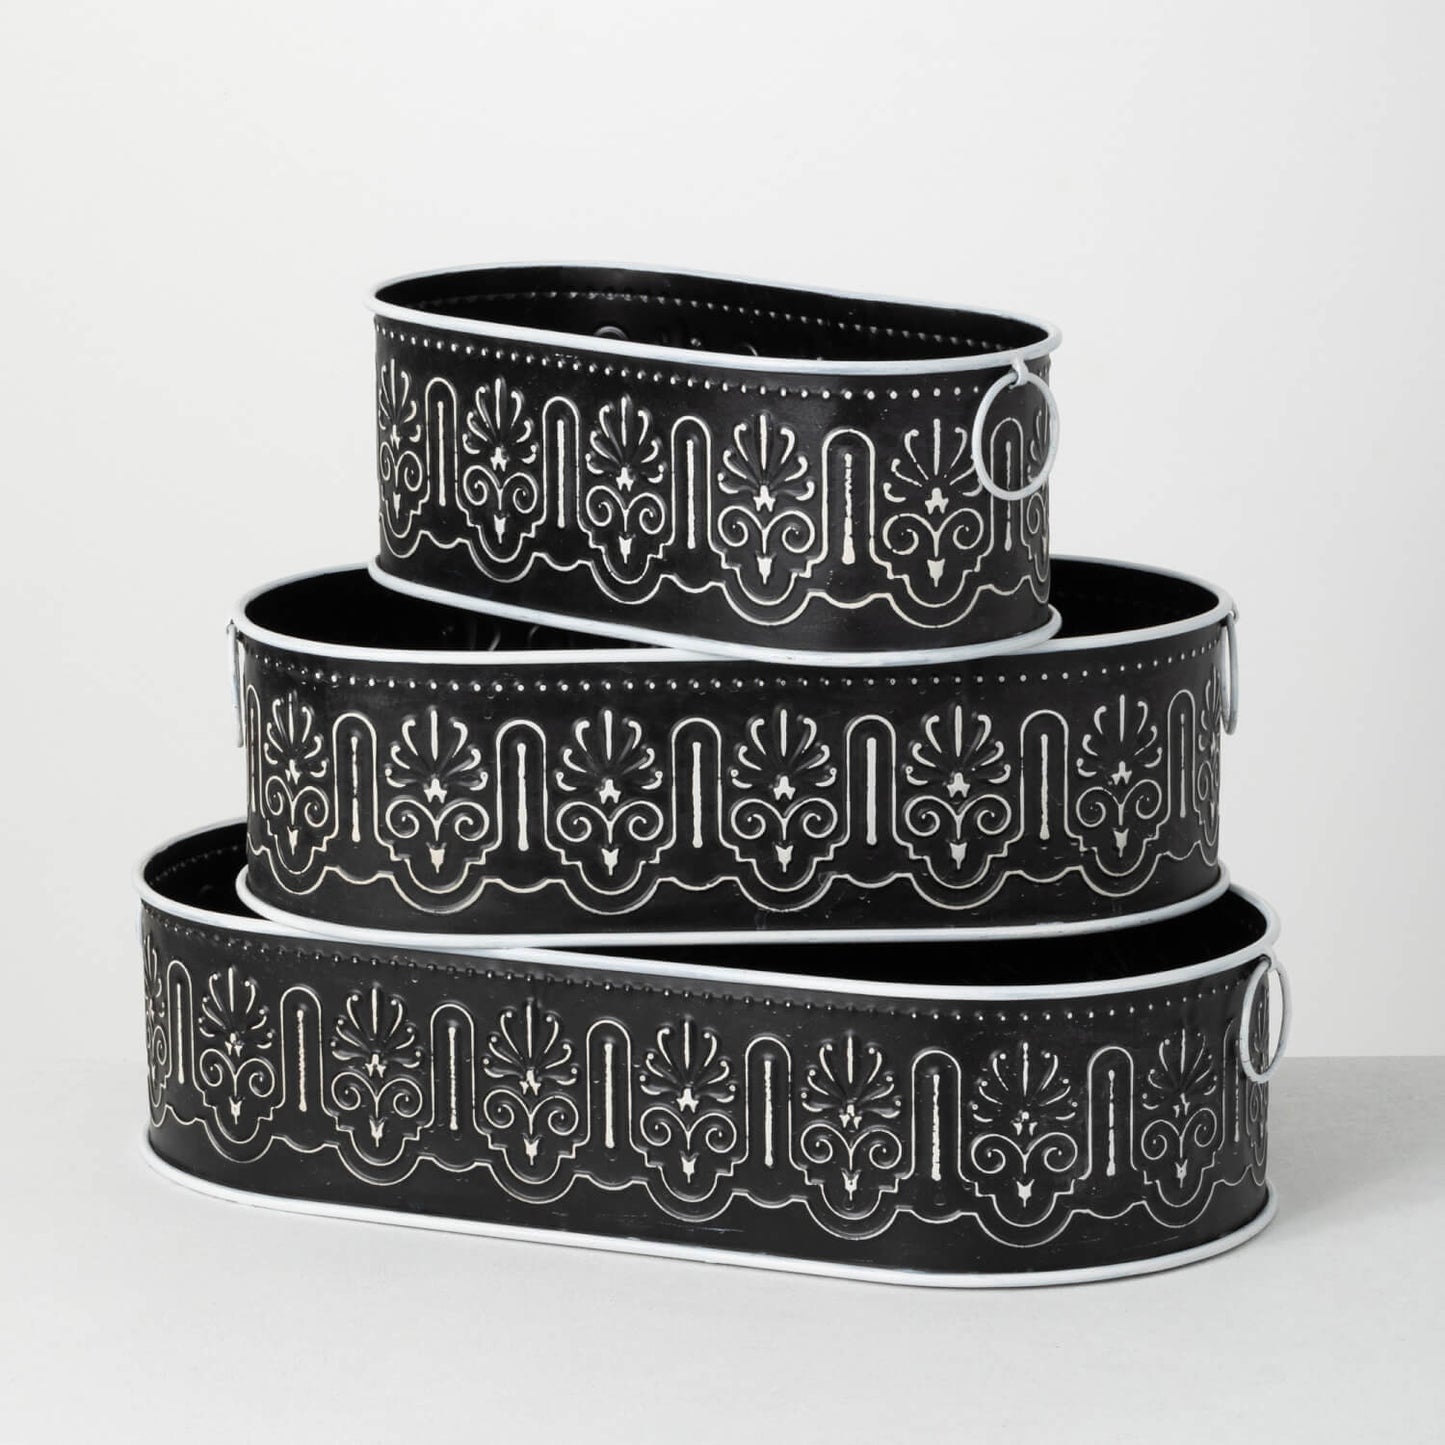 small, medium, and large black oval buckets with white geometric designs.